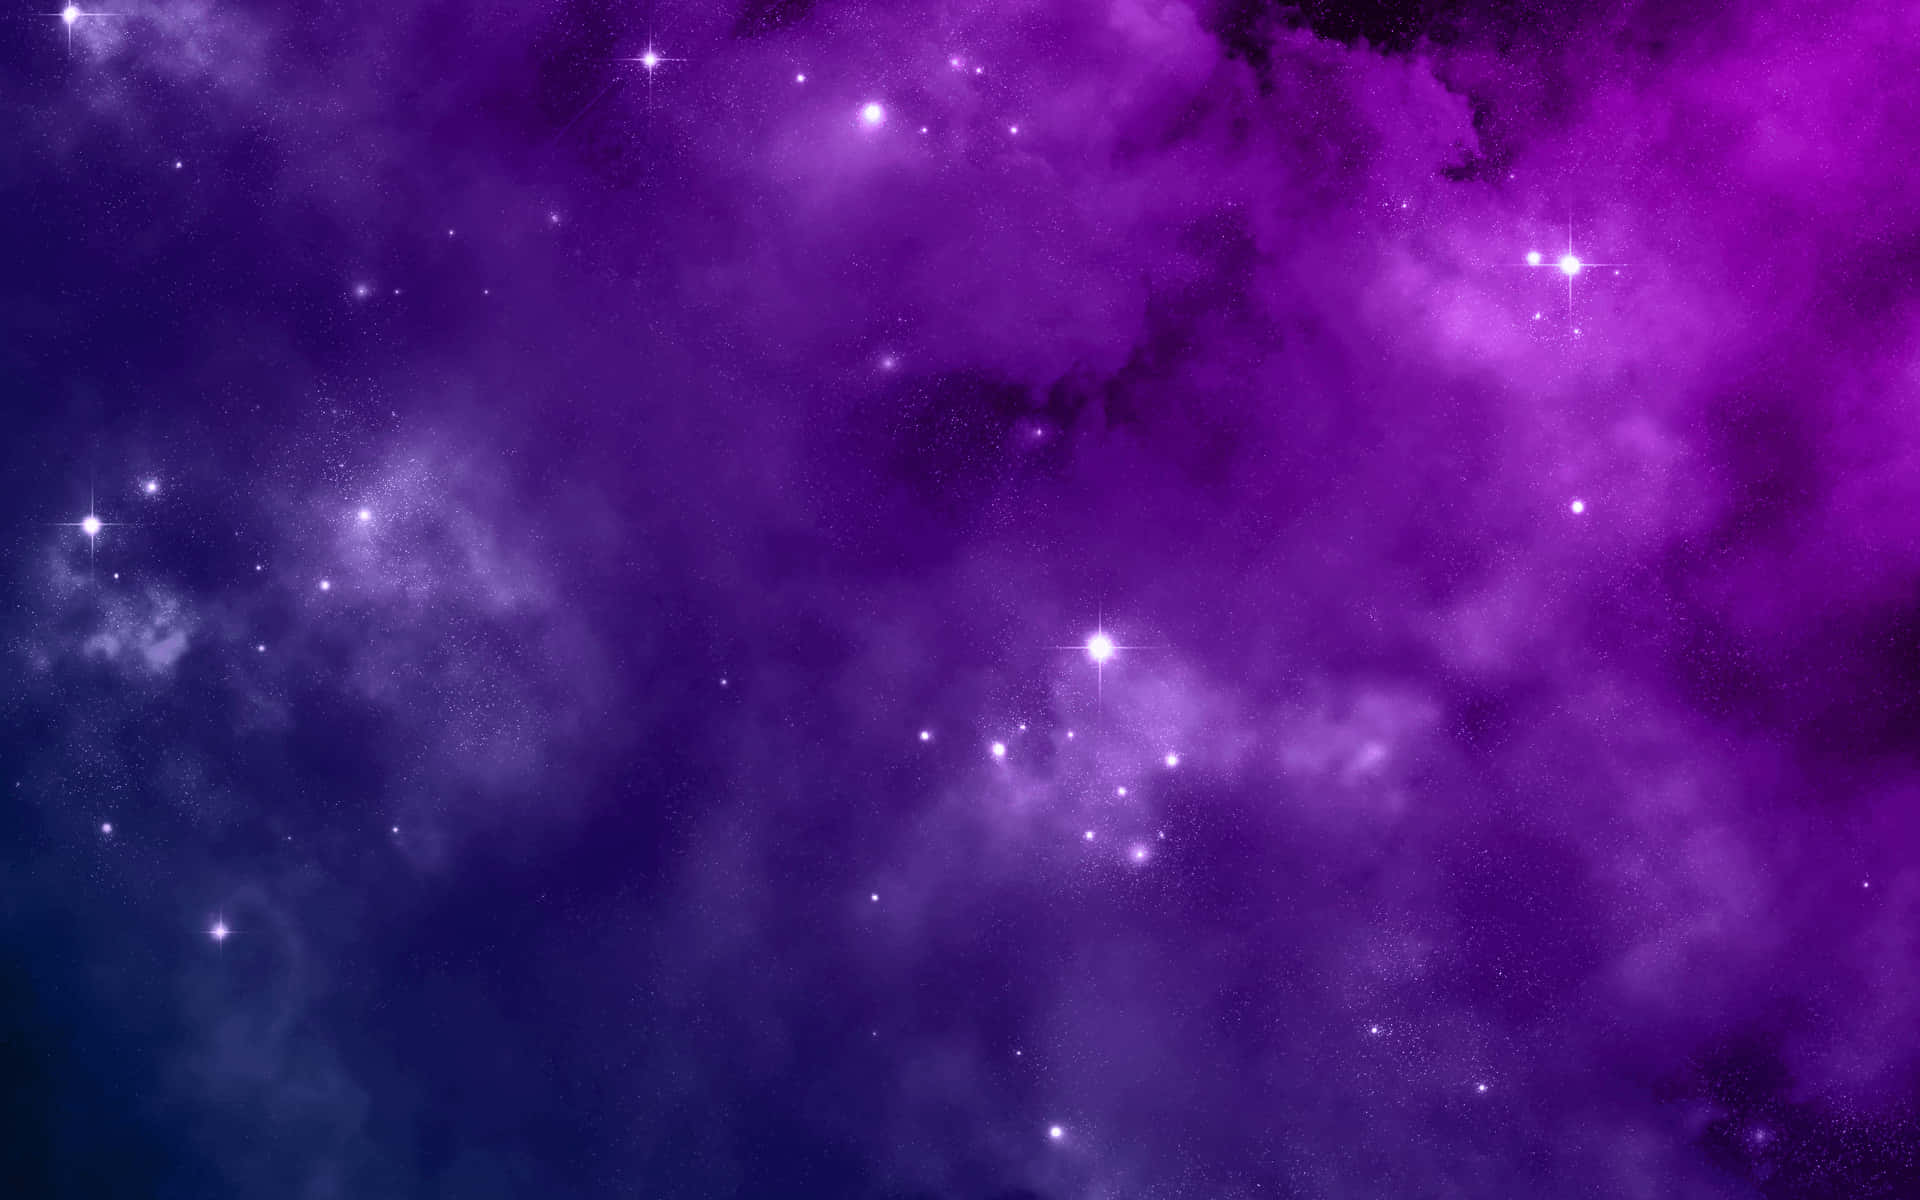 Explore the beauty of the cosmos with a purple space background.